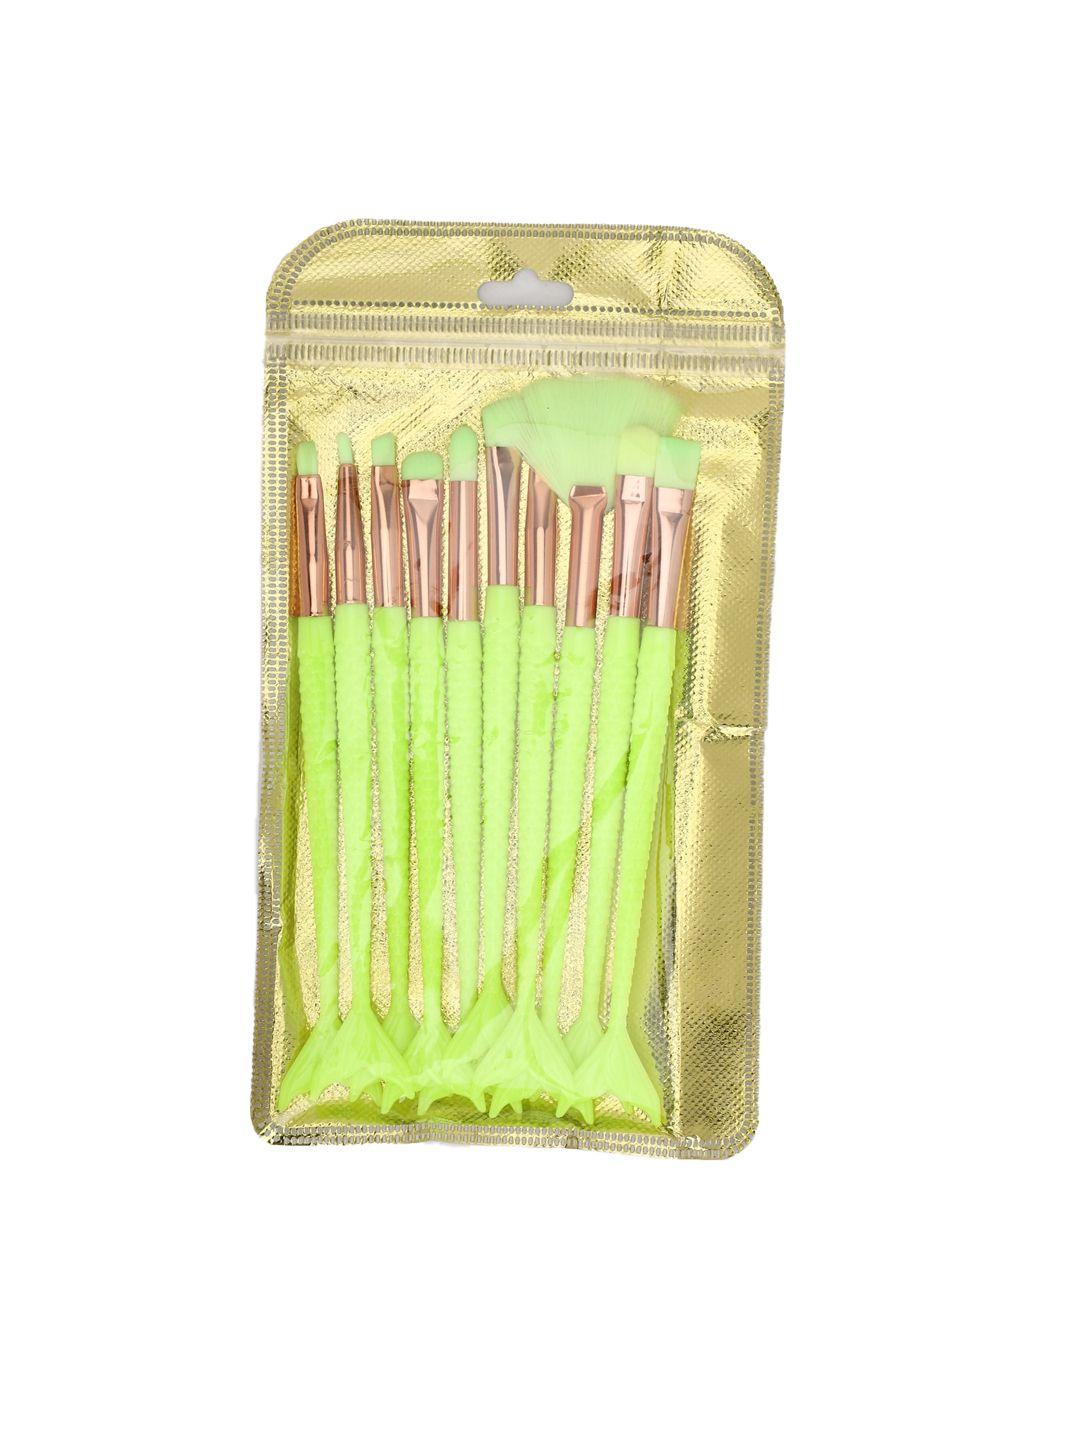 forever 21 set of 10 green solid cosmetic face brushes